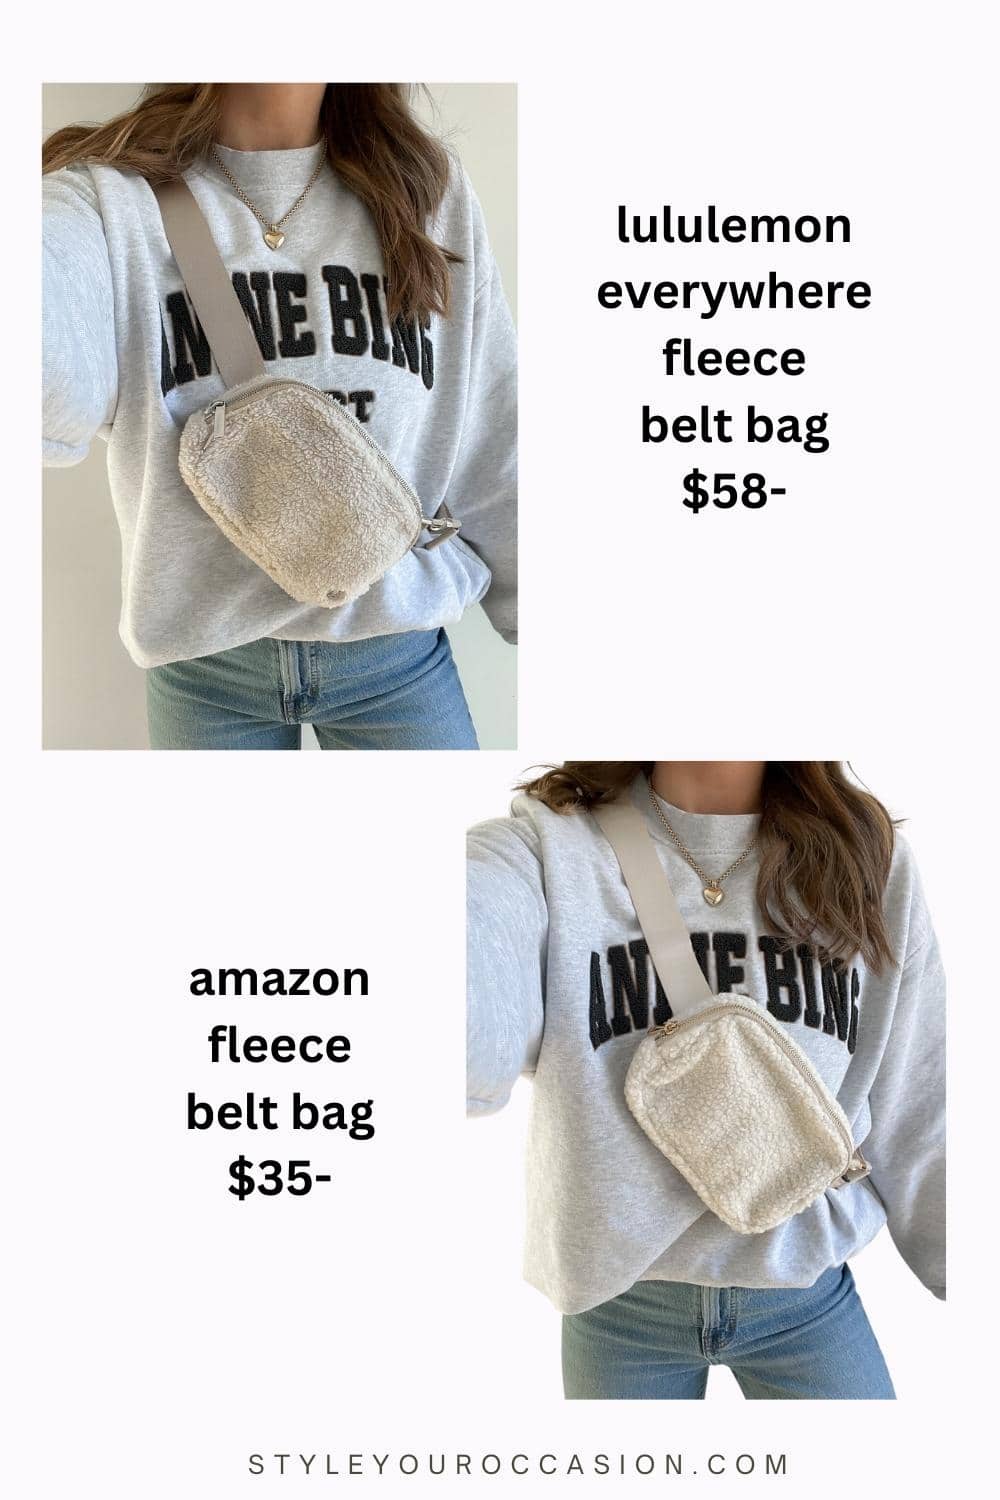 image comparing a woman wearing two fleece belt bags, one from lululemon, and one a dupe from amazon